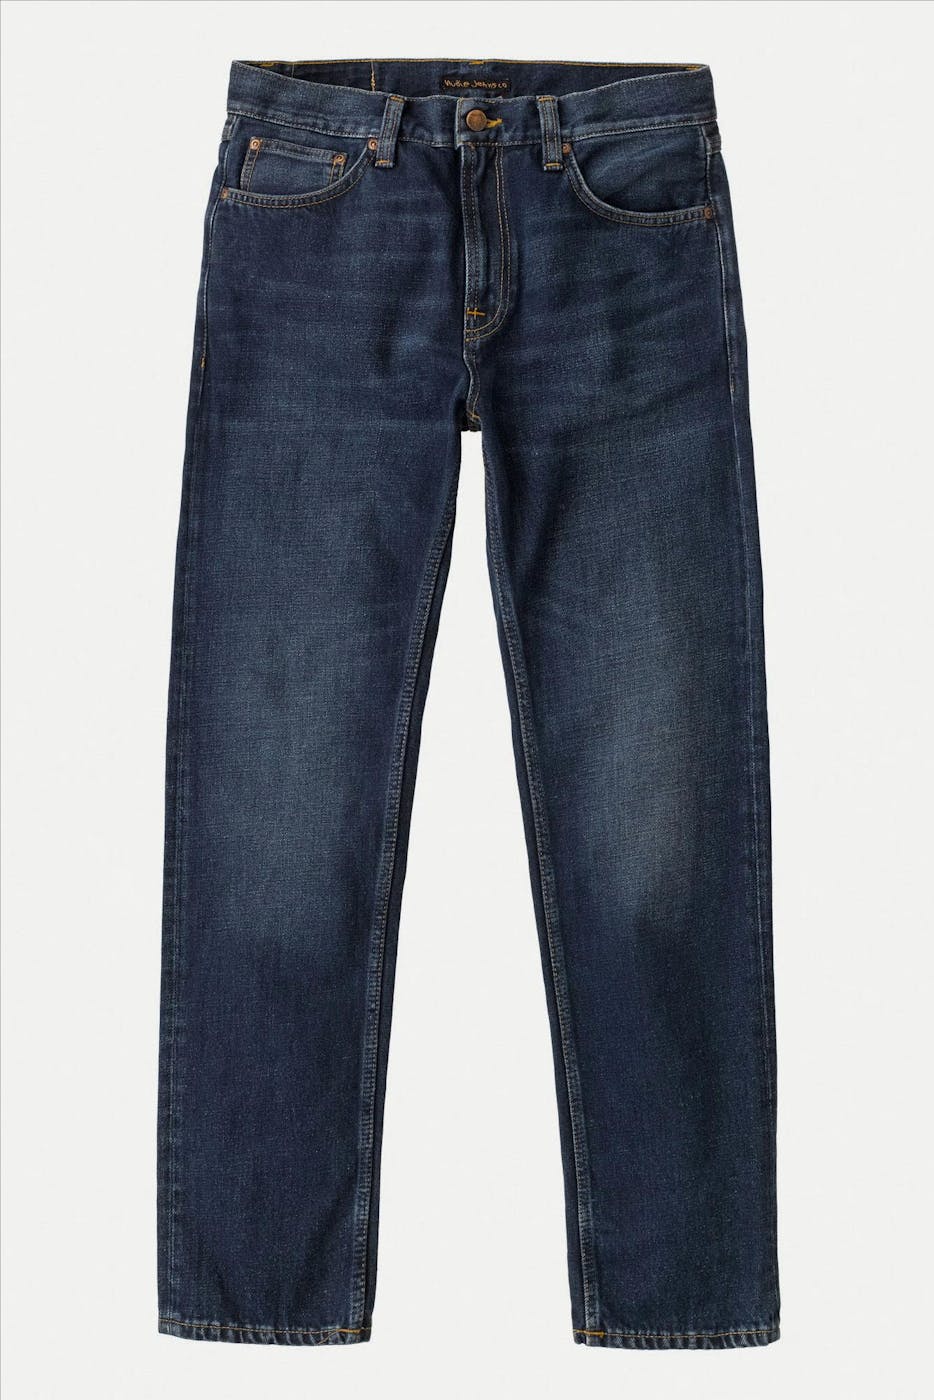 Nudie Jeans Co. - Donkerblauwe Gritty Jackson straight jeans